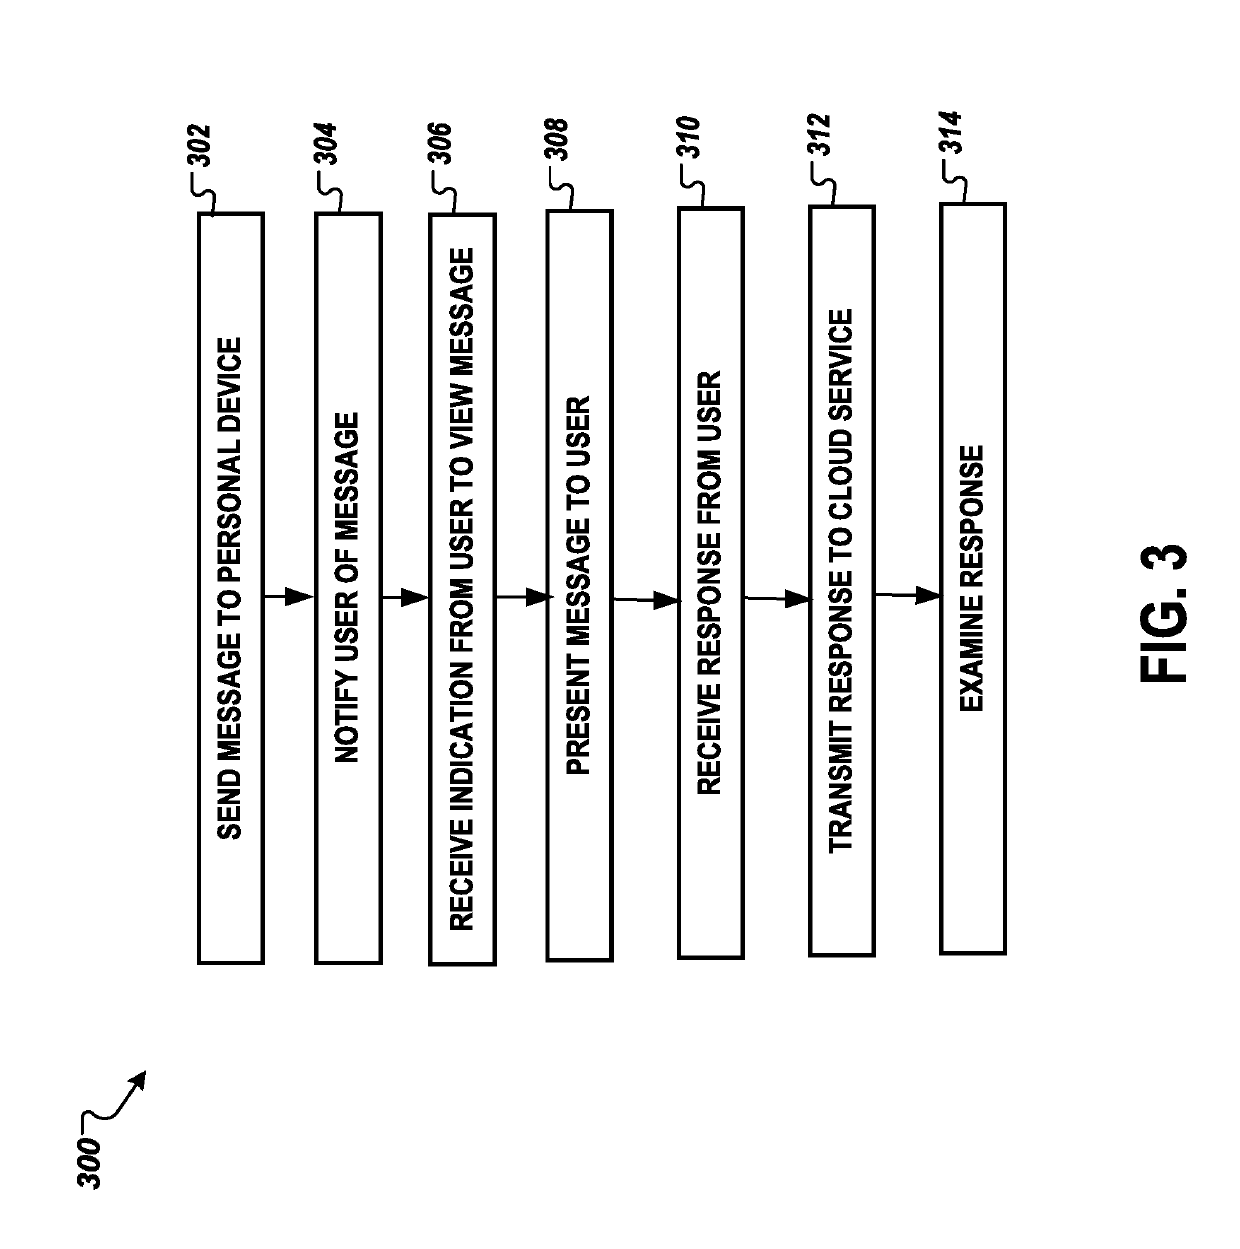 System and method of retrieving and conveying sensitive information when using voice command devices